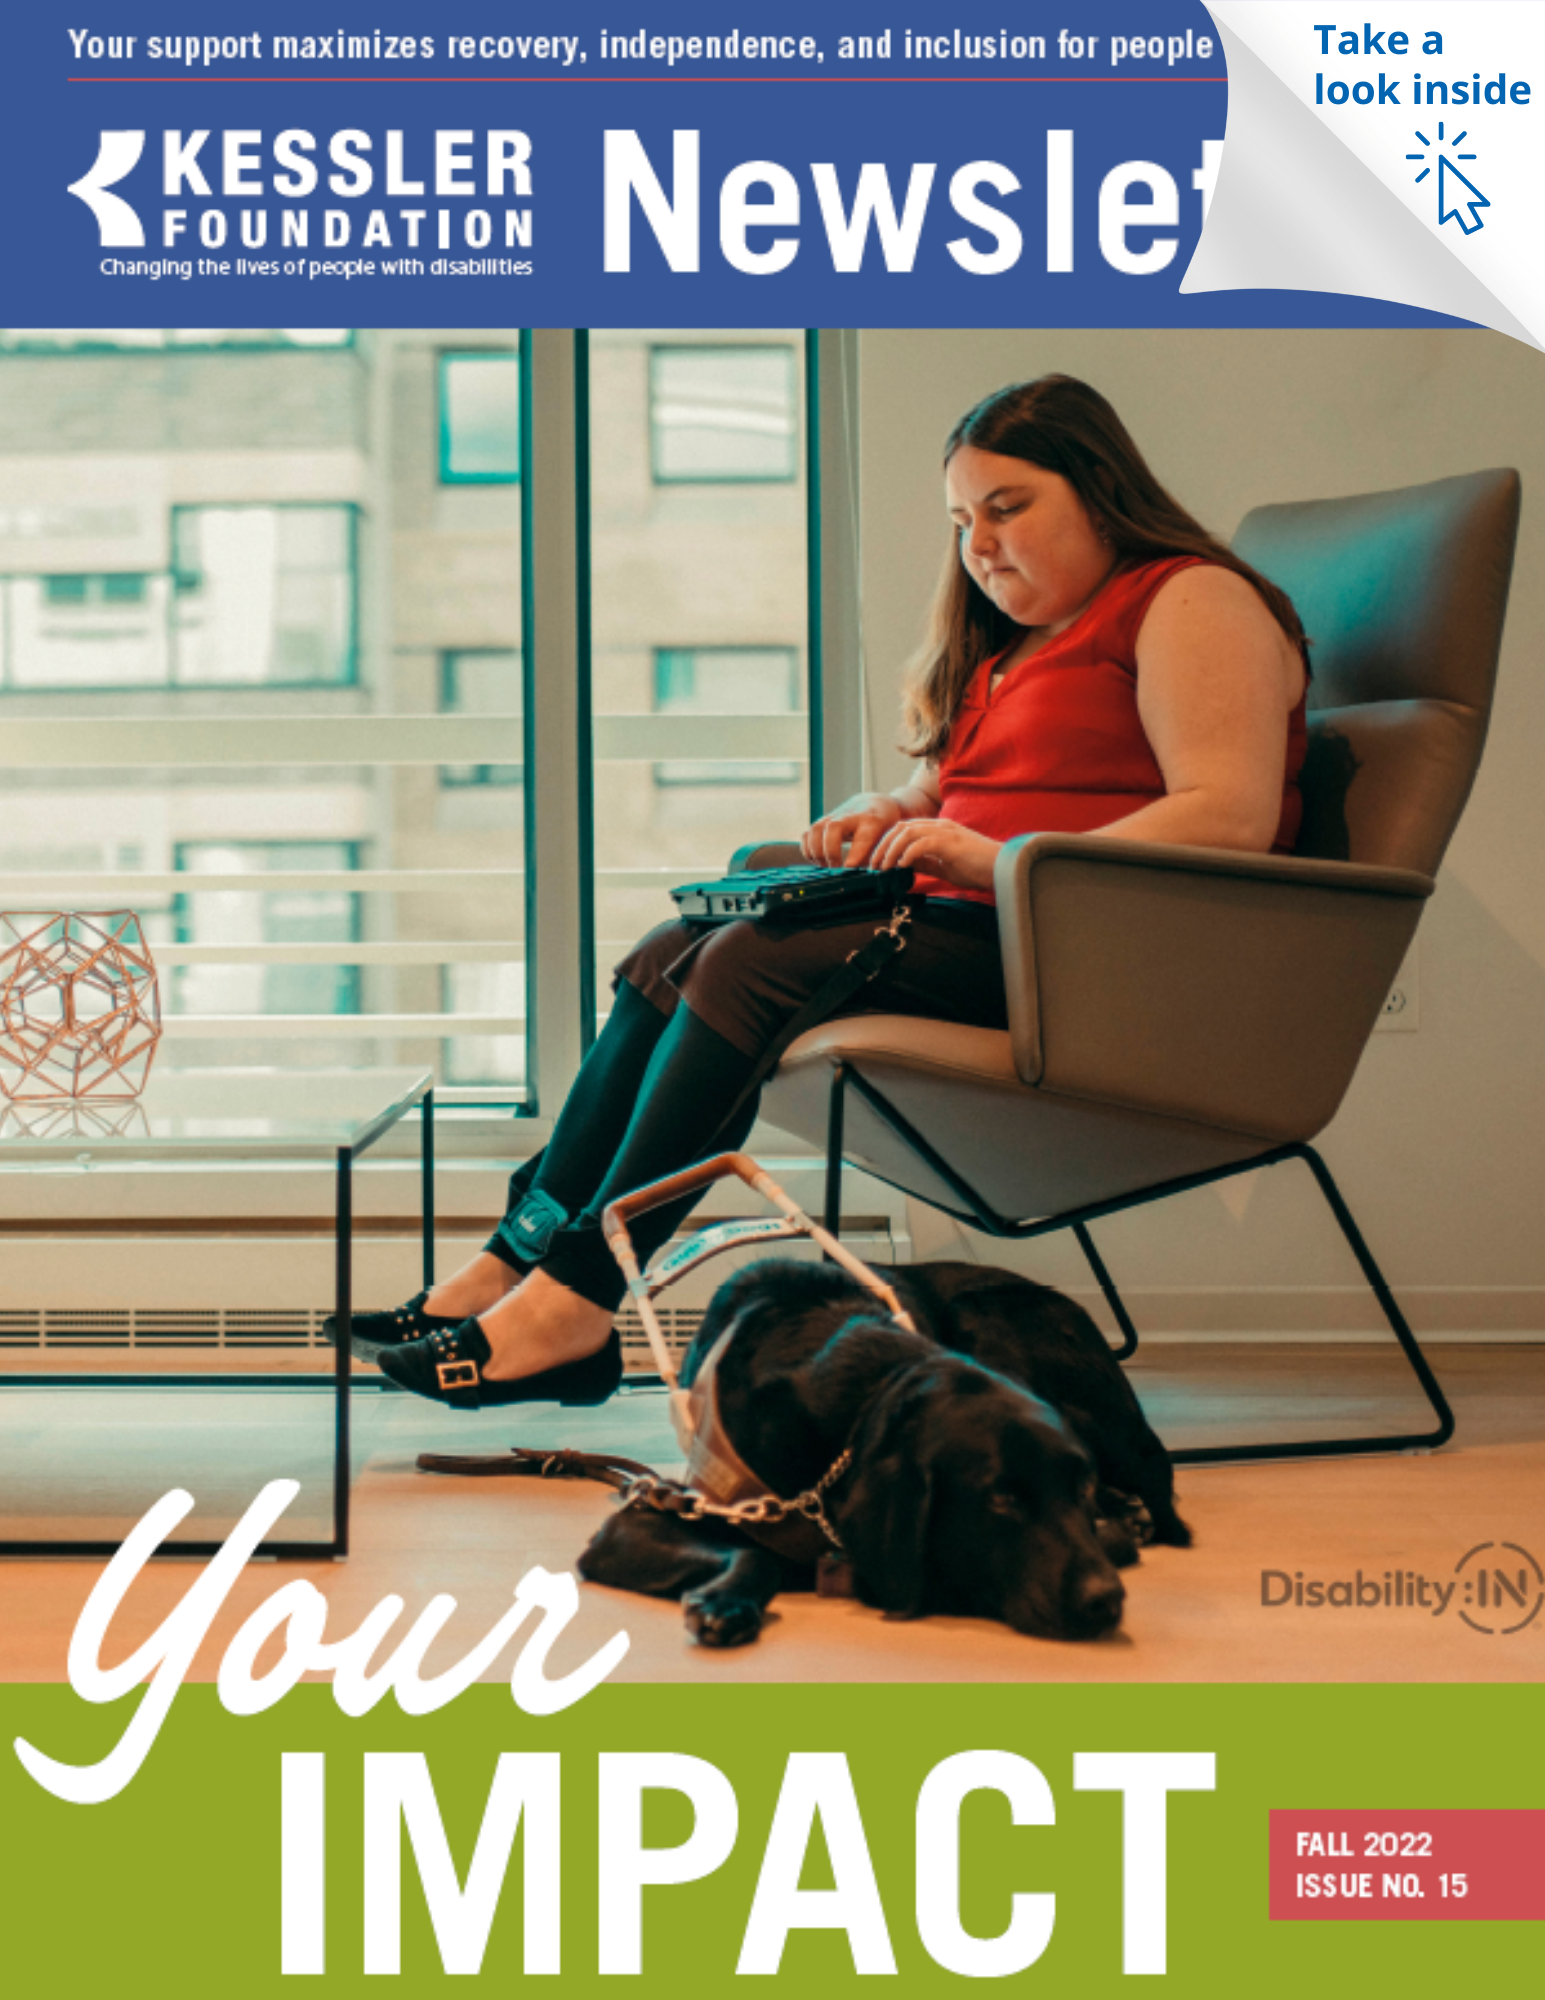 newsletter cover with woman sitting on chair with her service dog